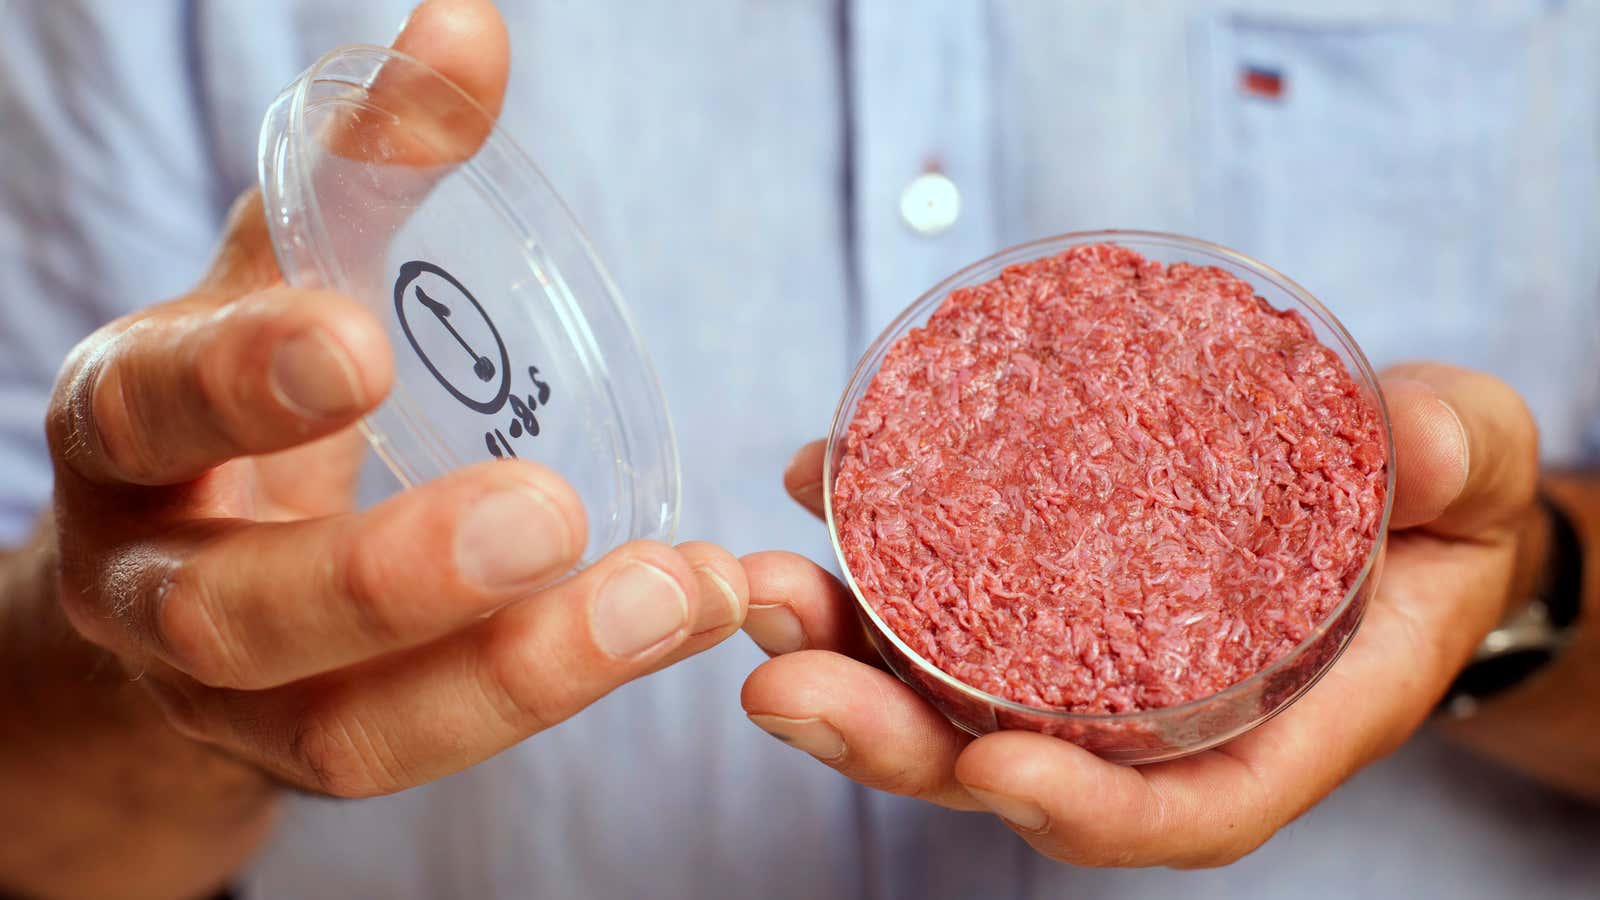 One of the world’s first lab-grown burgers, but far from the last.